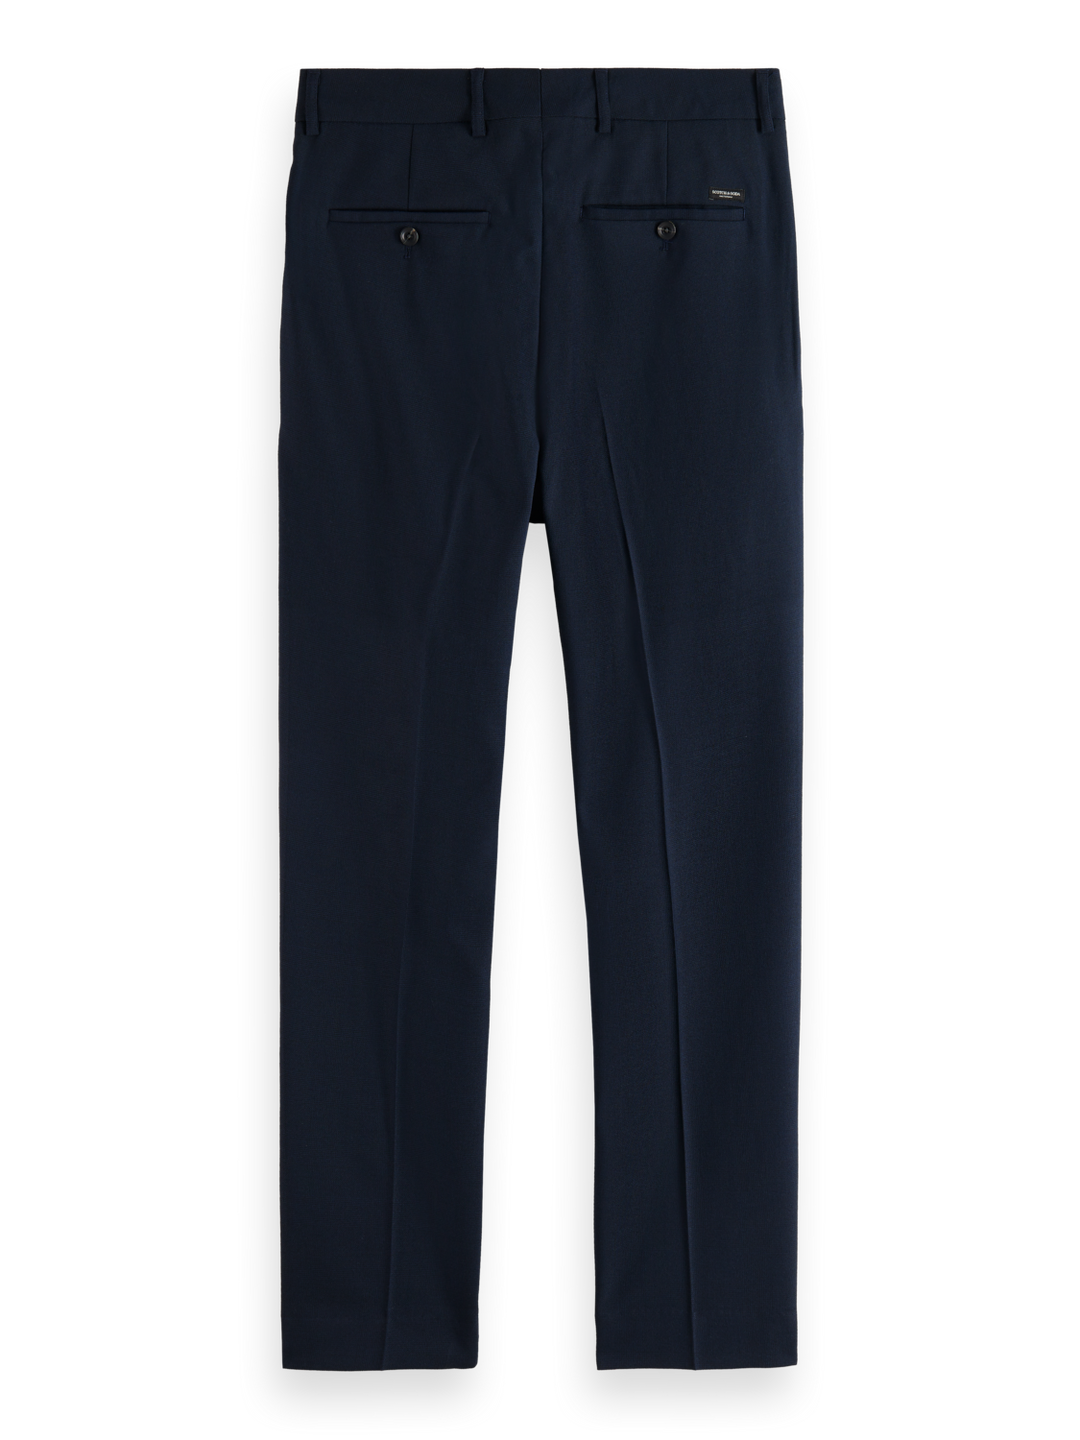 Slim Tapered Fit Chino in Night Check | Buster McGee